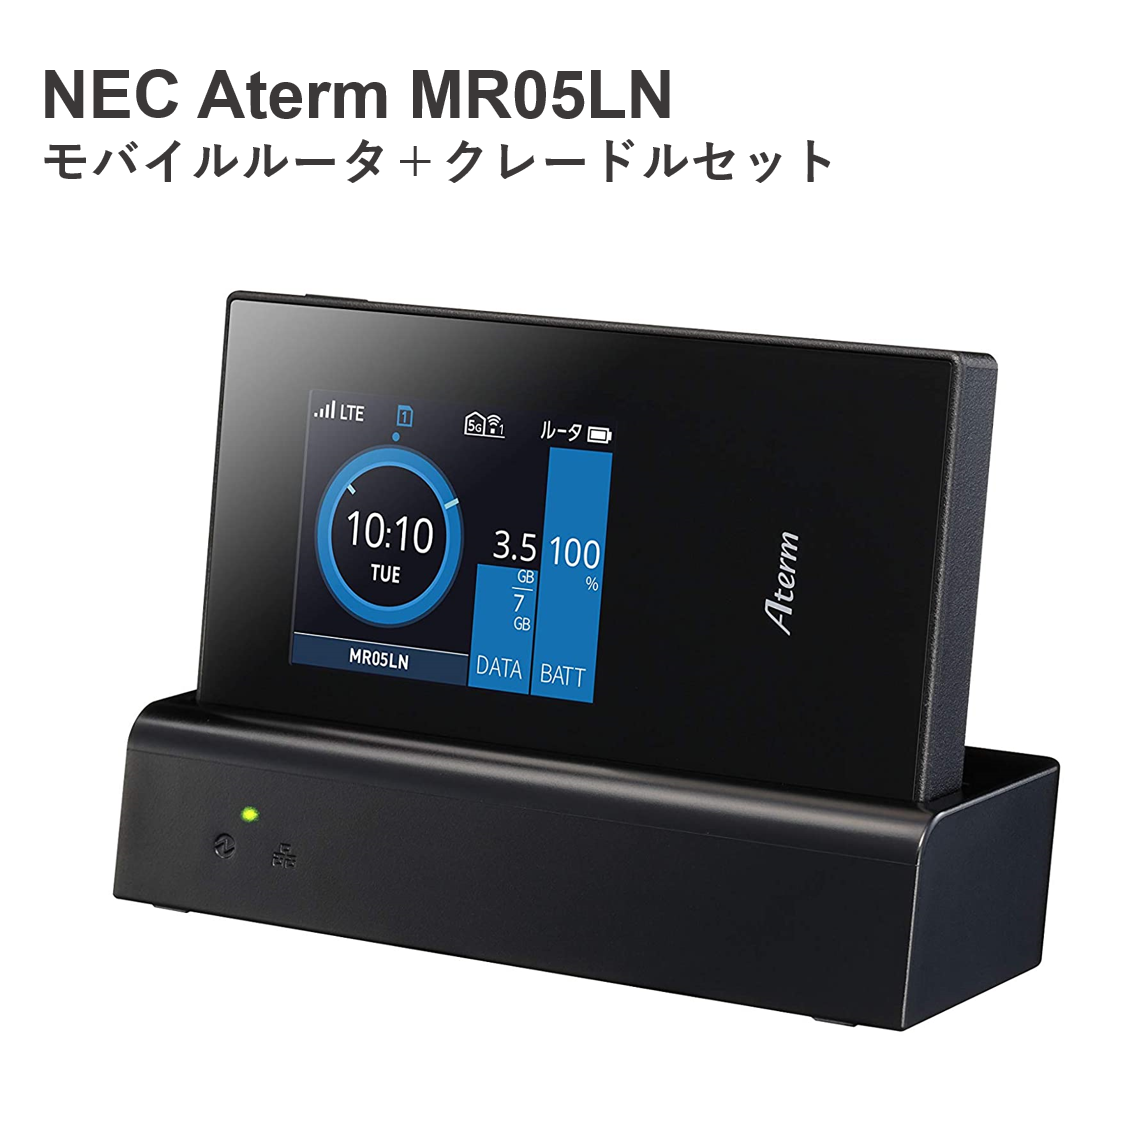 HIS Mobile ONLINE SHOP 商品詳細Aterm MR05LN+クレードル/新品